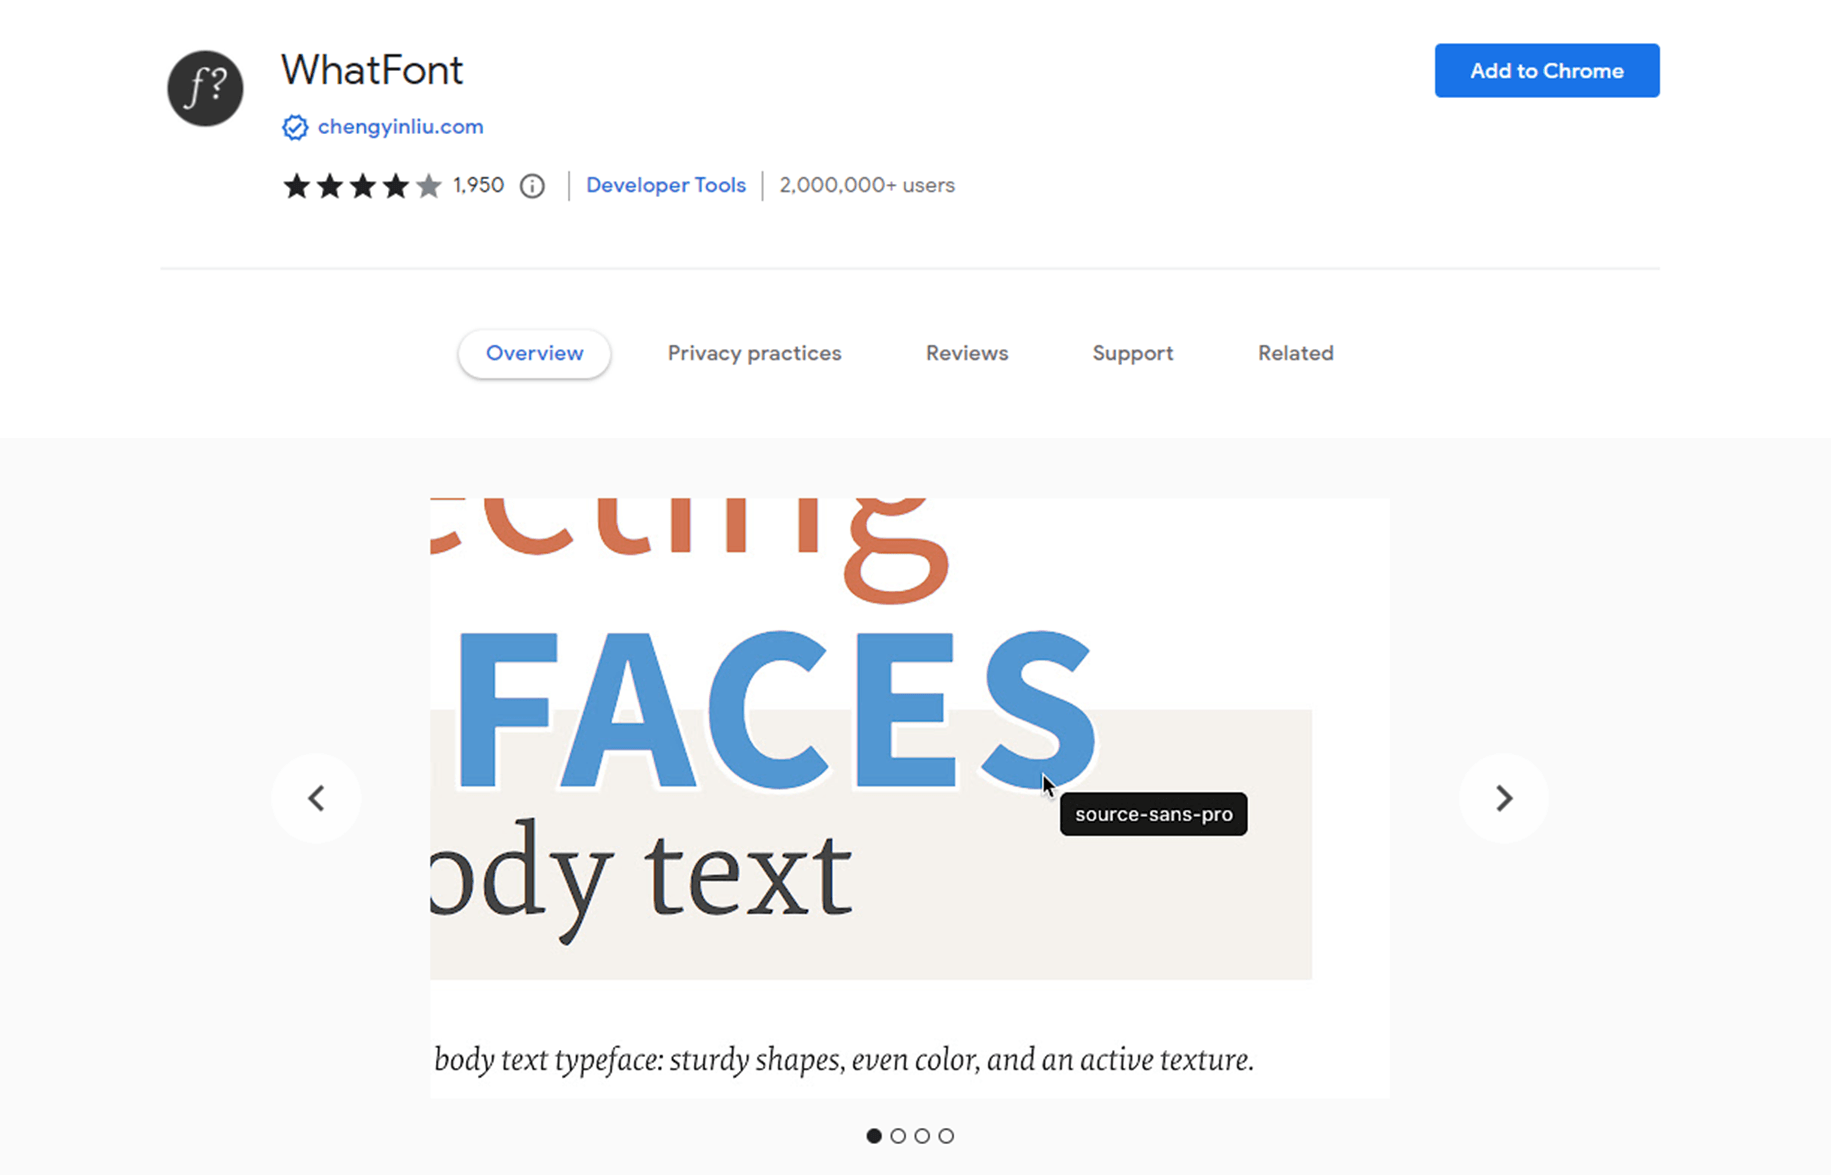 WHAT FONT CHROME EXTENSION, IDENTIFY FONT WITHIN 1 MINUTE